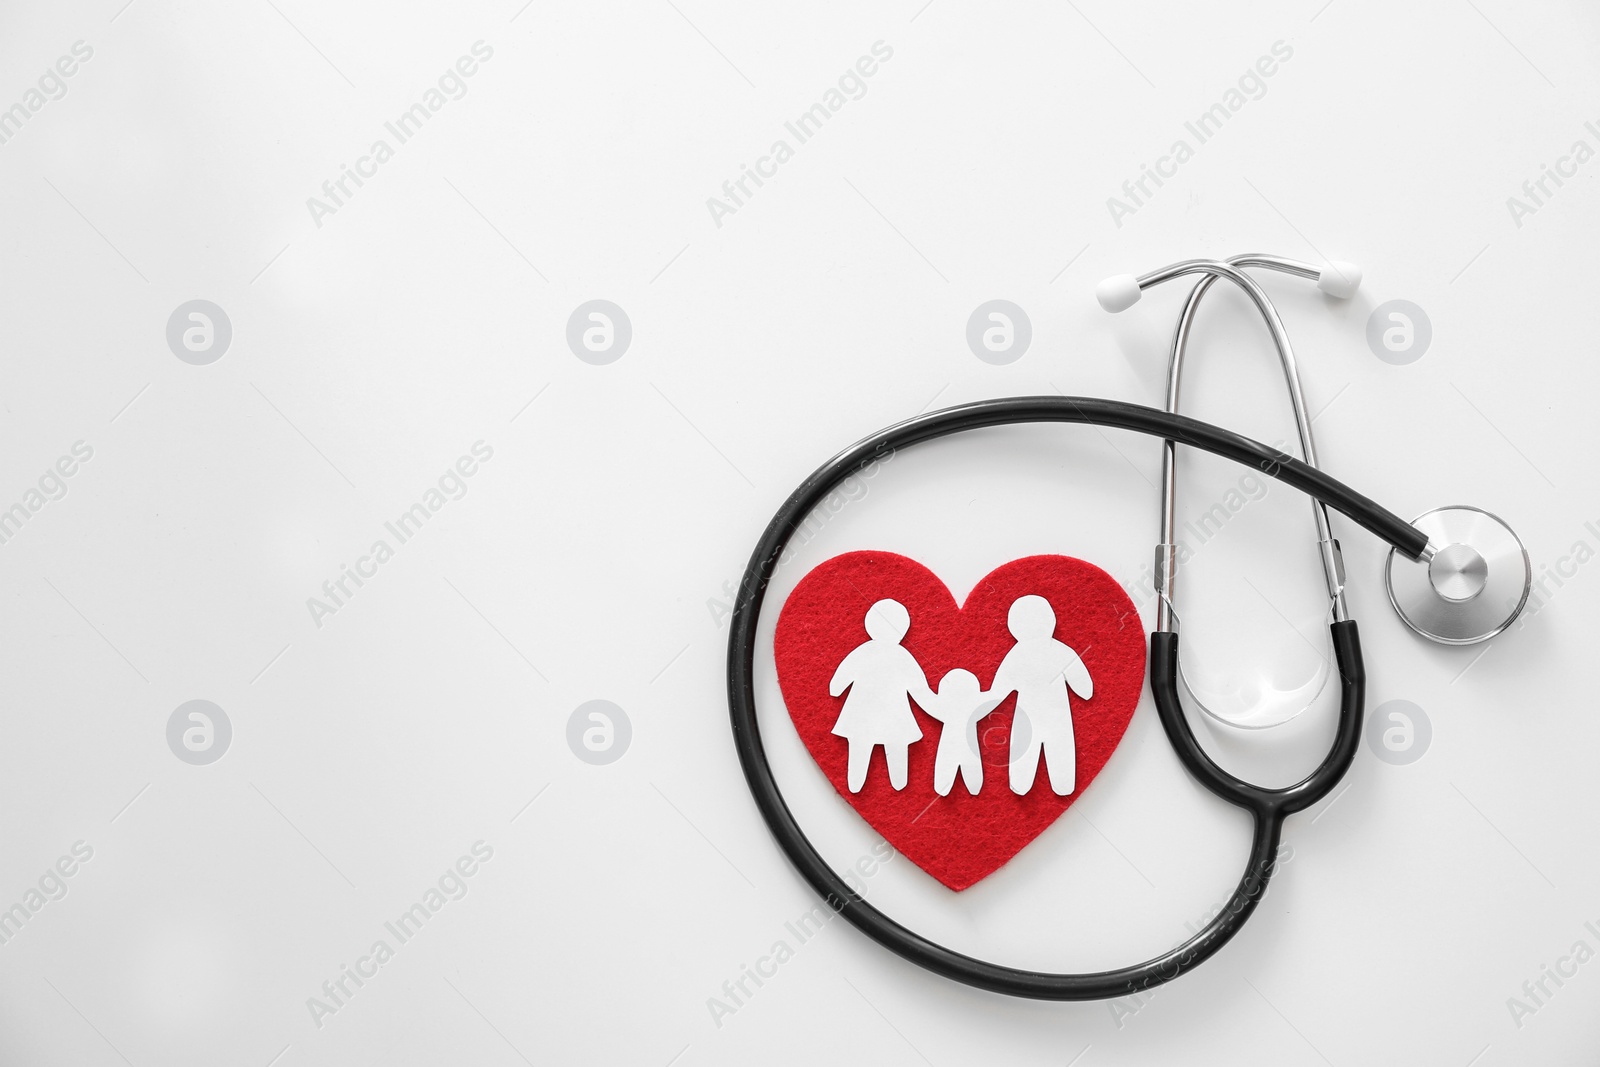 Photo of Paper silhouette of people, red heart and stethoscope on light background, top view